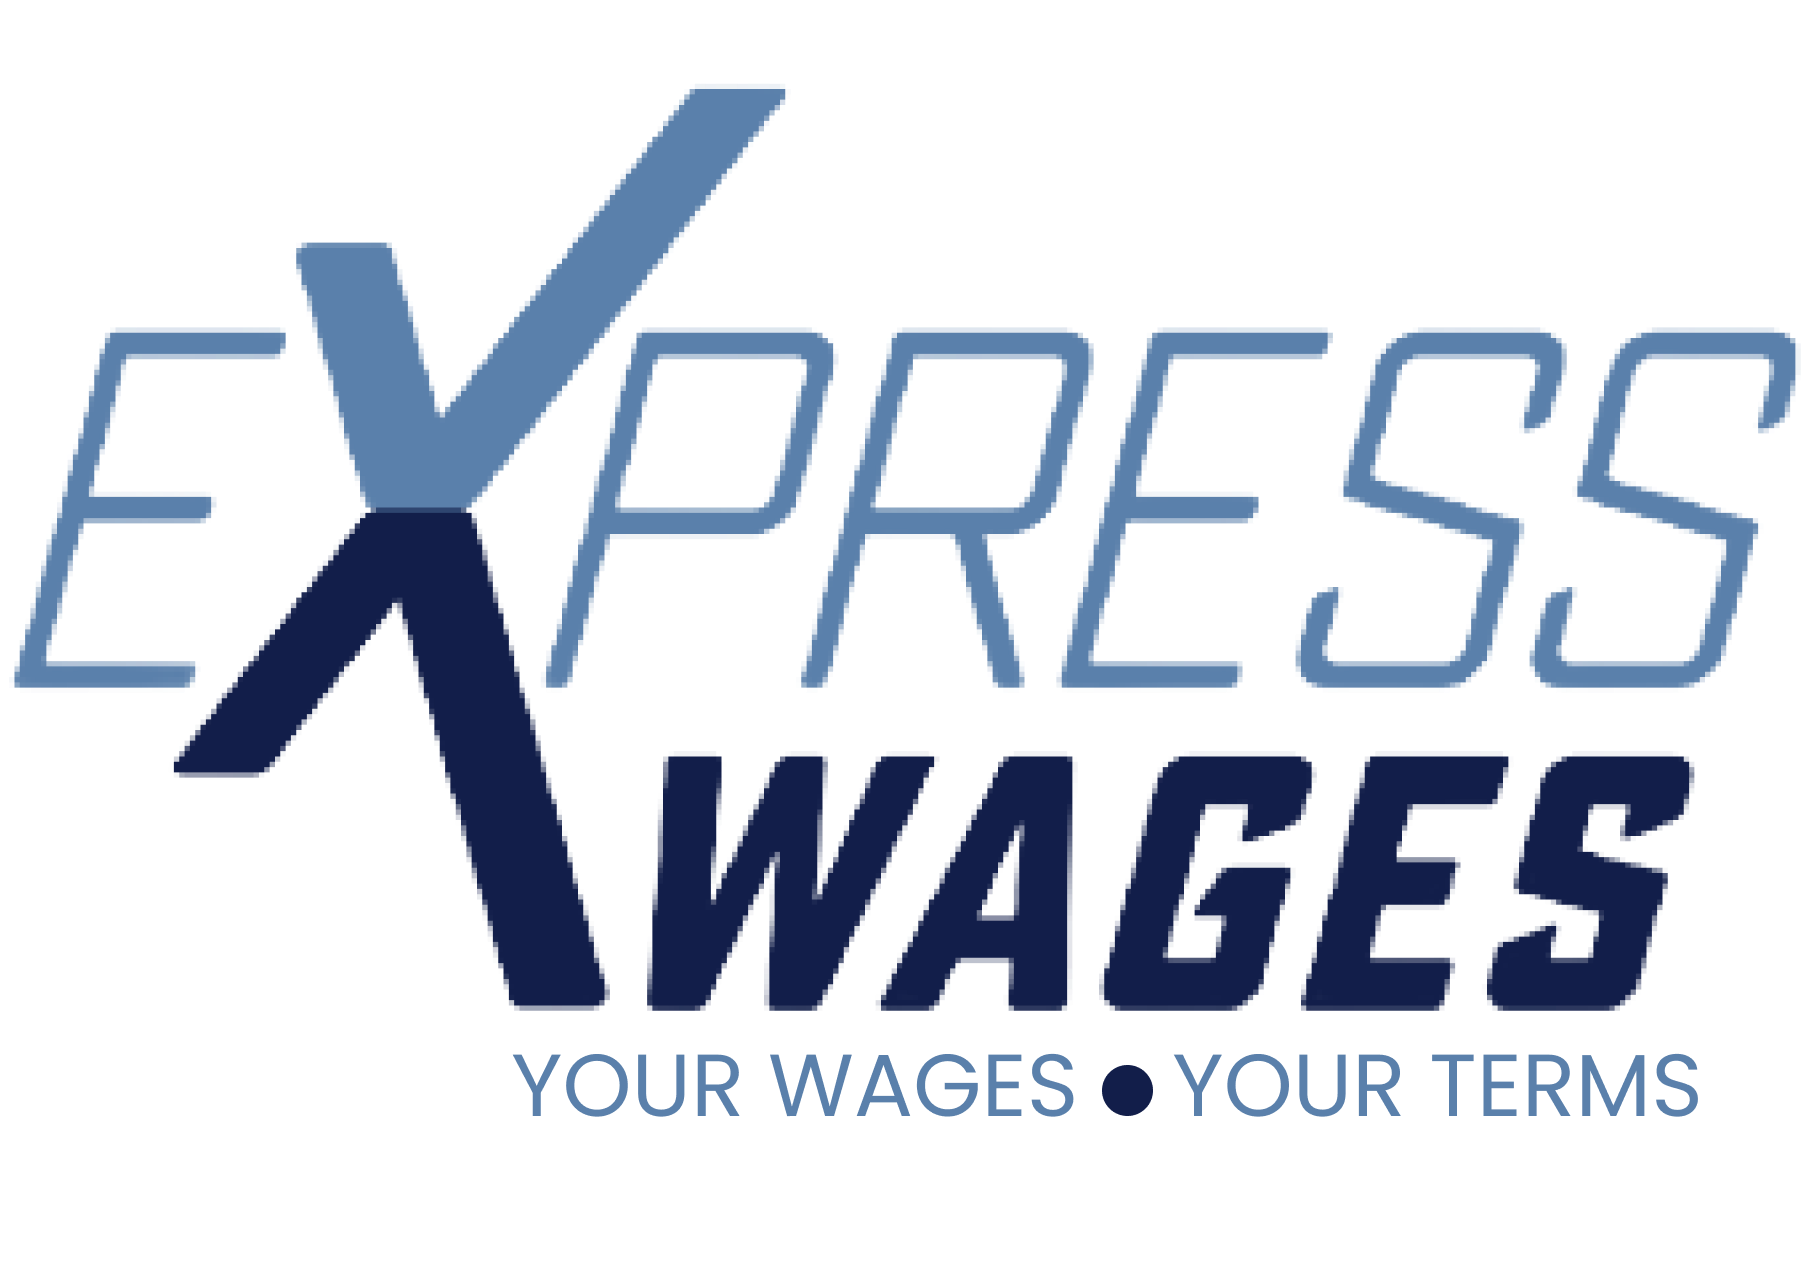 Express Wages